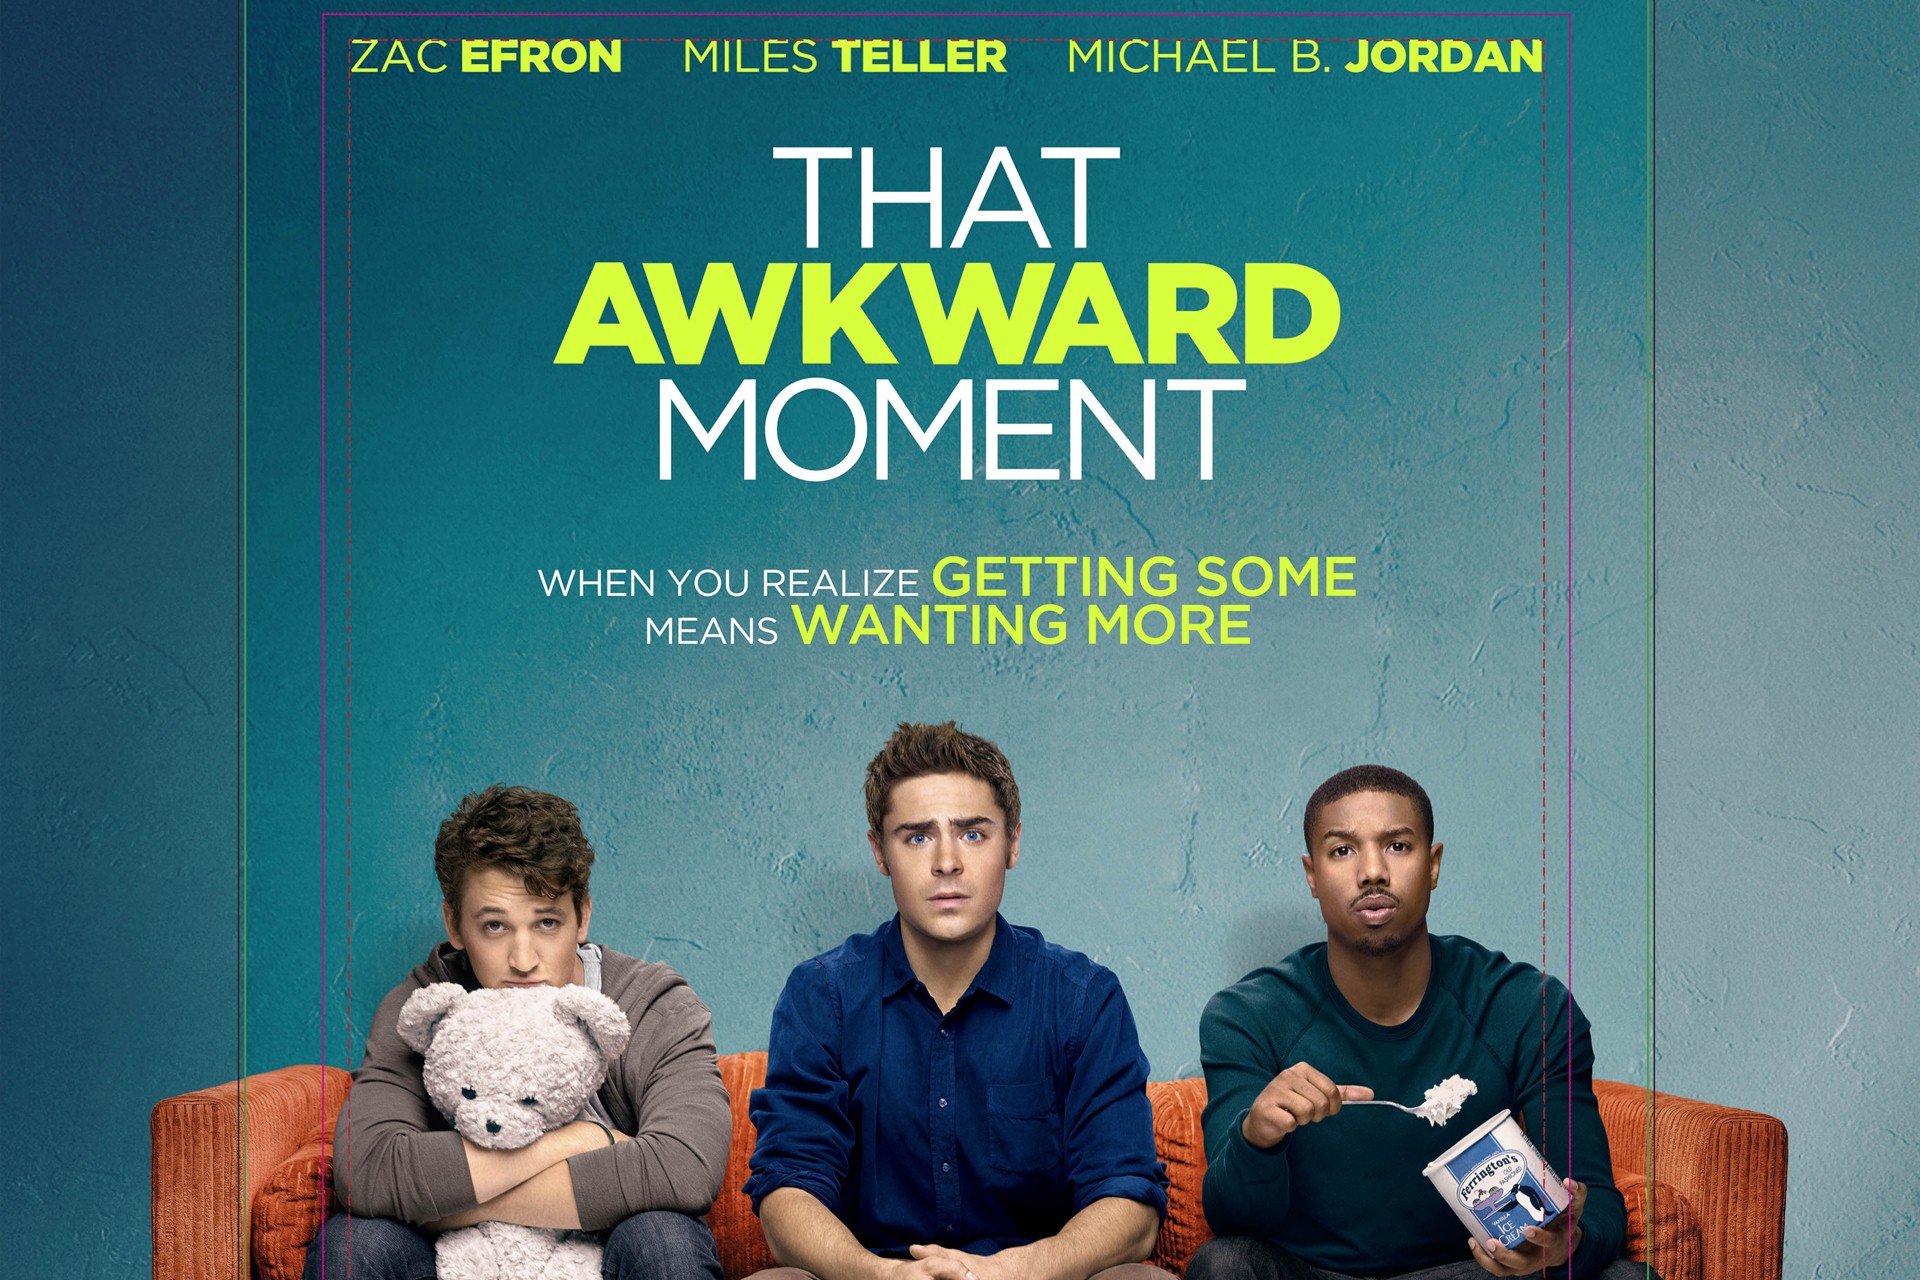 That Awkward Moment Wallpapers Movie Hq That Awkward Moment Images, Photos, Reviews